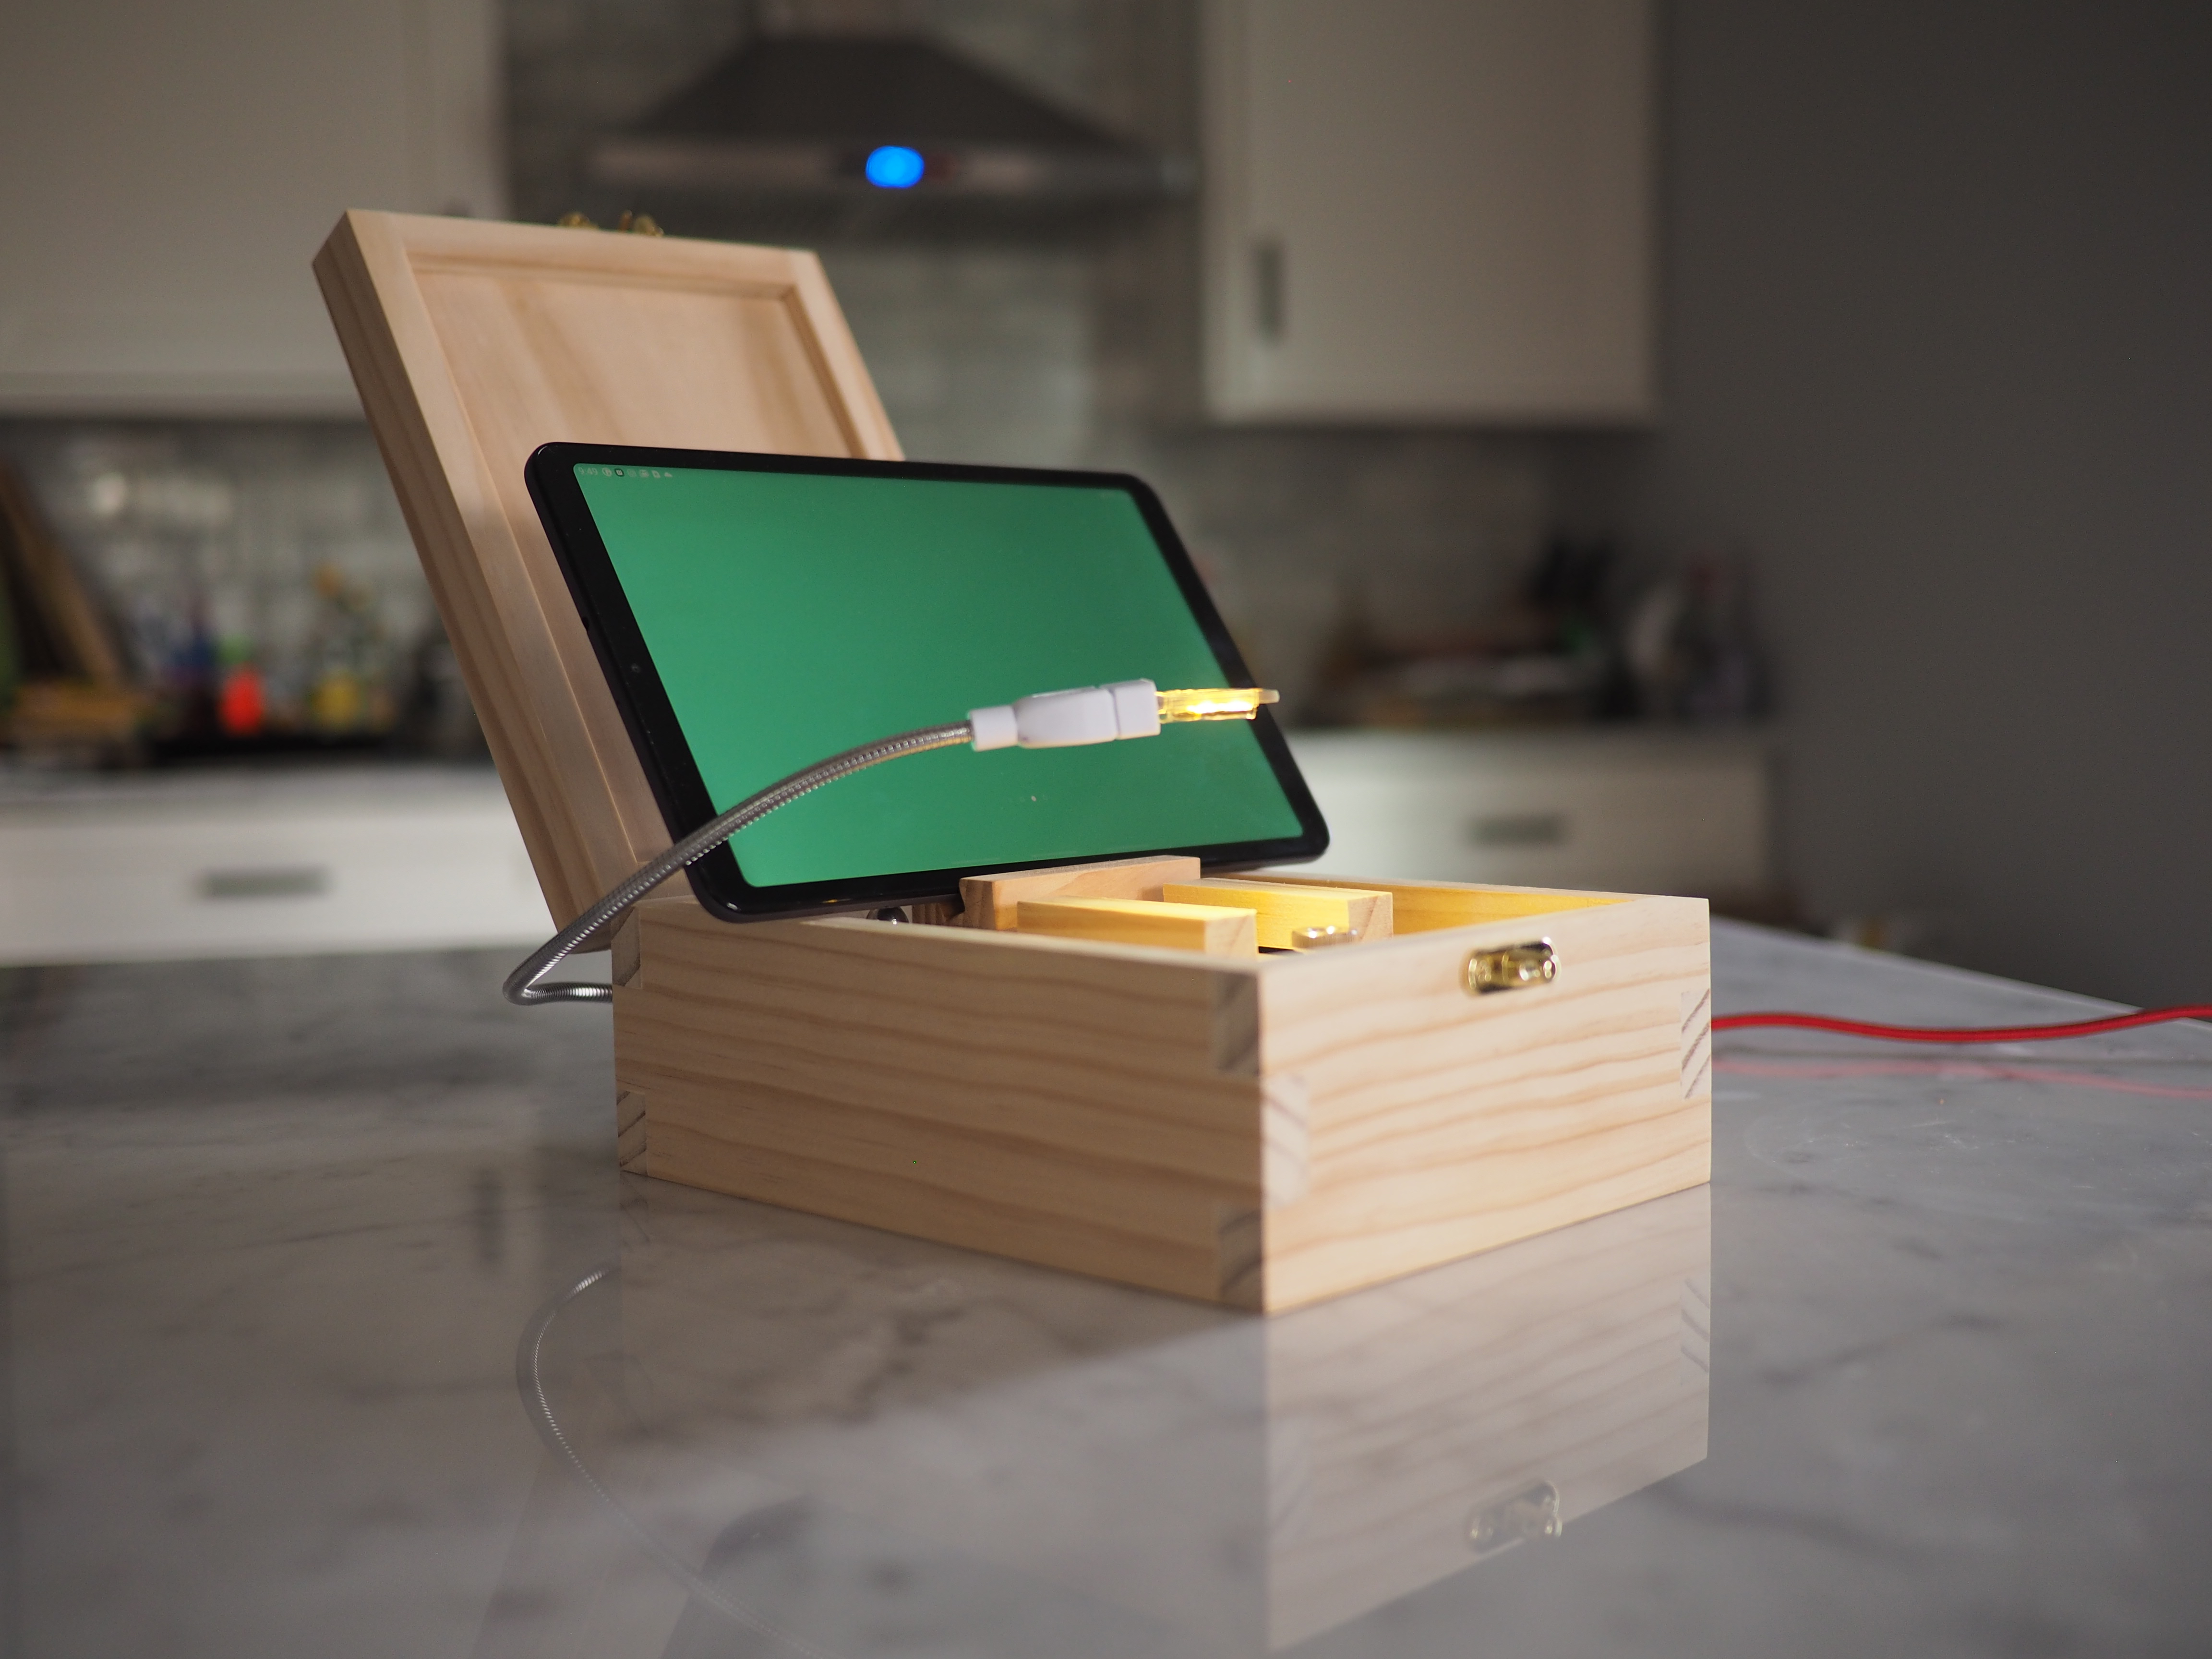 A small pine box with interlocking joints sits on a marble countertop in a dimly lit room, lid open, with a green-screened tablet resting on top and a yellow light illuminating the box interior from a silver gooseneck hovering above it, which leads to the rear of the box. A red cable runs off the table in the background.